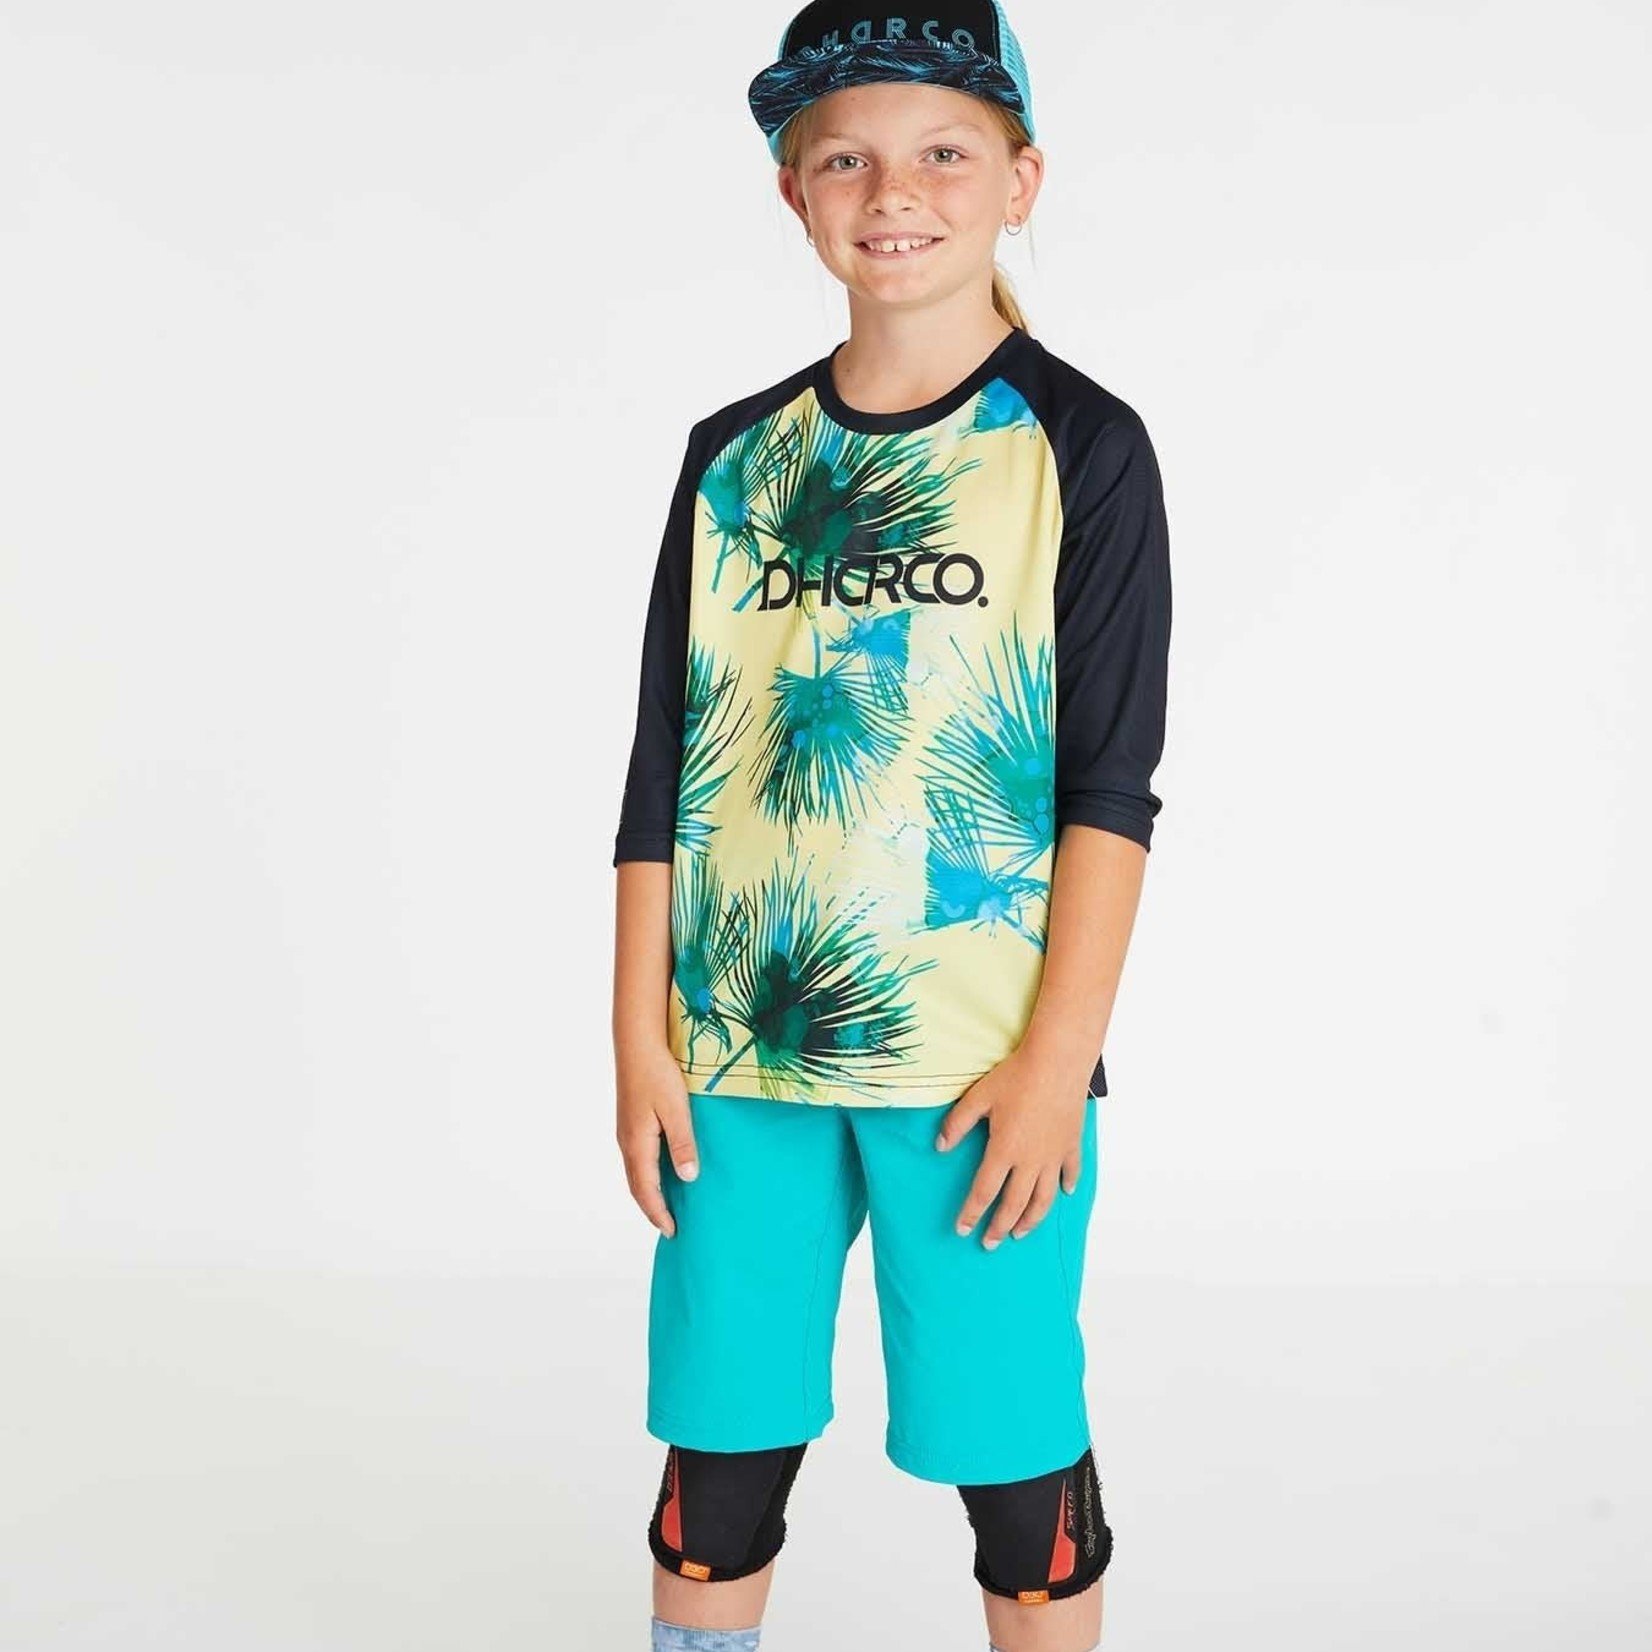 DHaRCO DHaRCO Youth 3/4 Sleeve Jersey Pineapple Express YL / 10